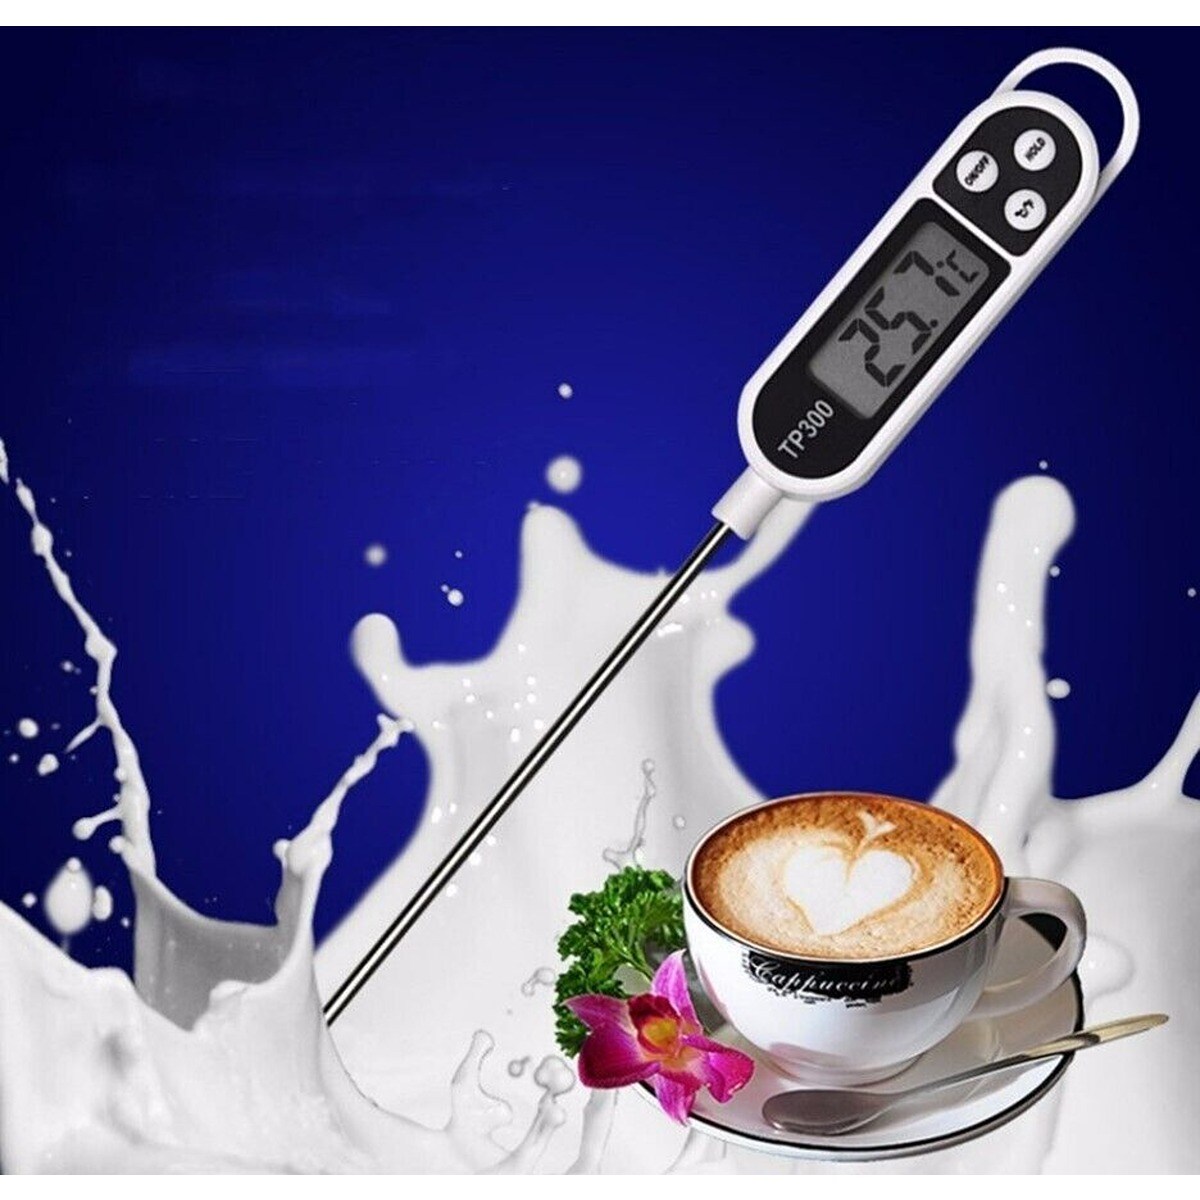 Stainless Steel Digital Cooking Thermometer